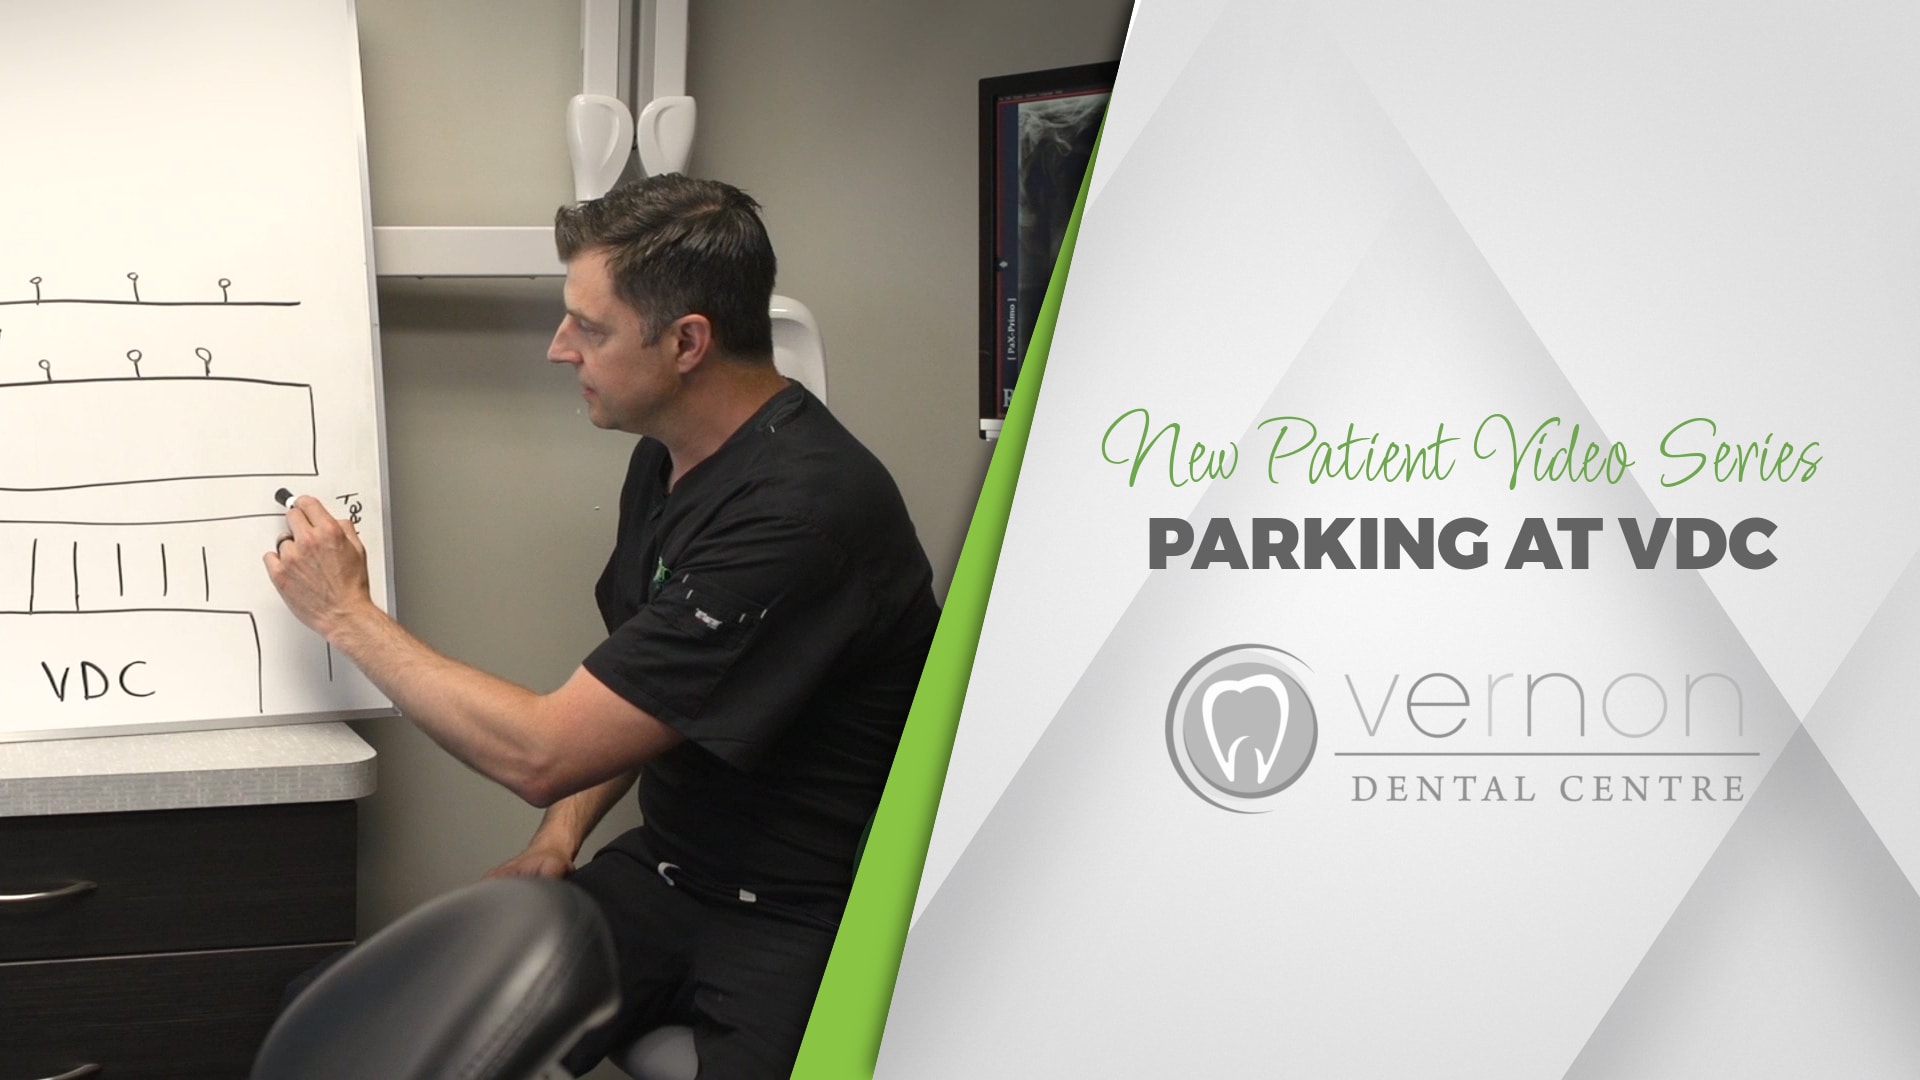 Dr. Anthony Berdan from the Vernon Dental Centre explains the different parking options available to patients